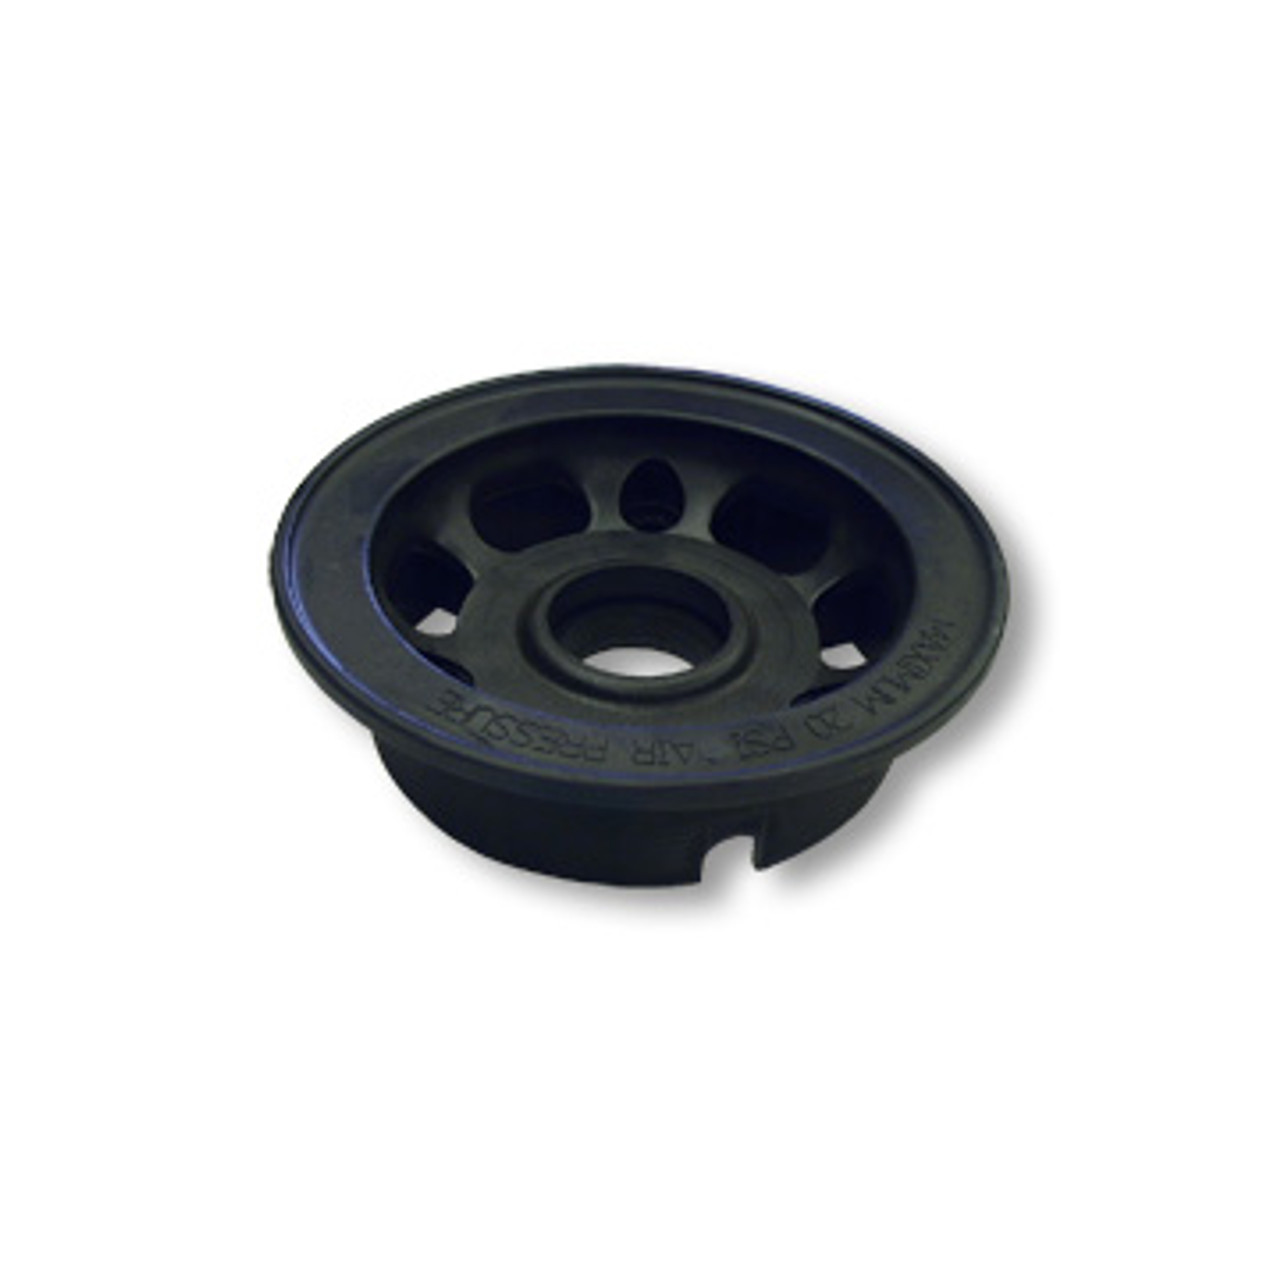 5" AZUSA Lite Wheel - For 1-5/8" OD Ball Bearings, One Half Only With Valve Hole, 1.5" Wide